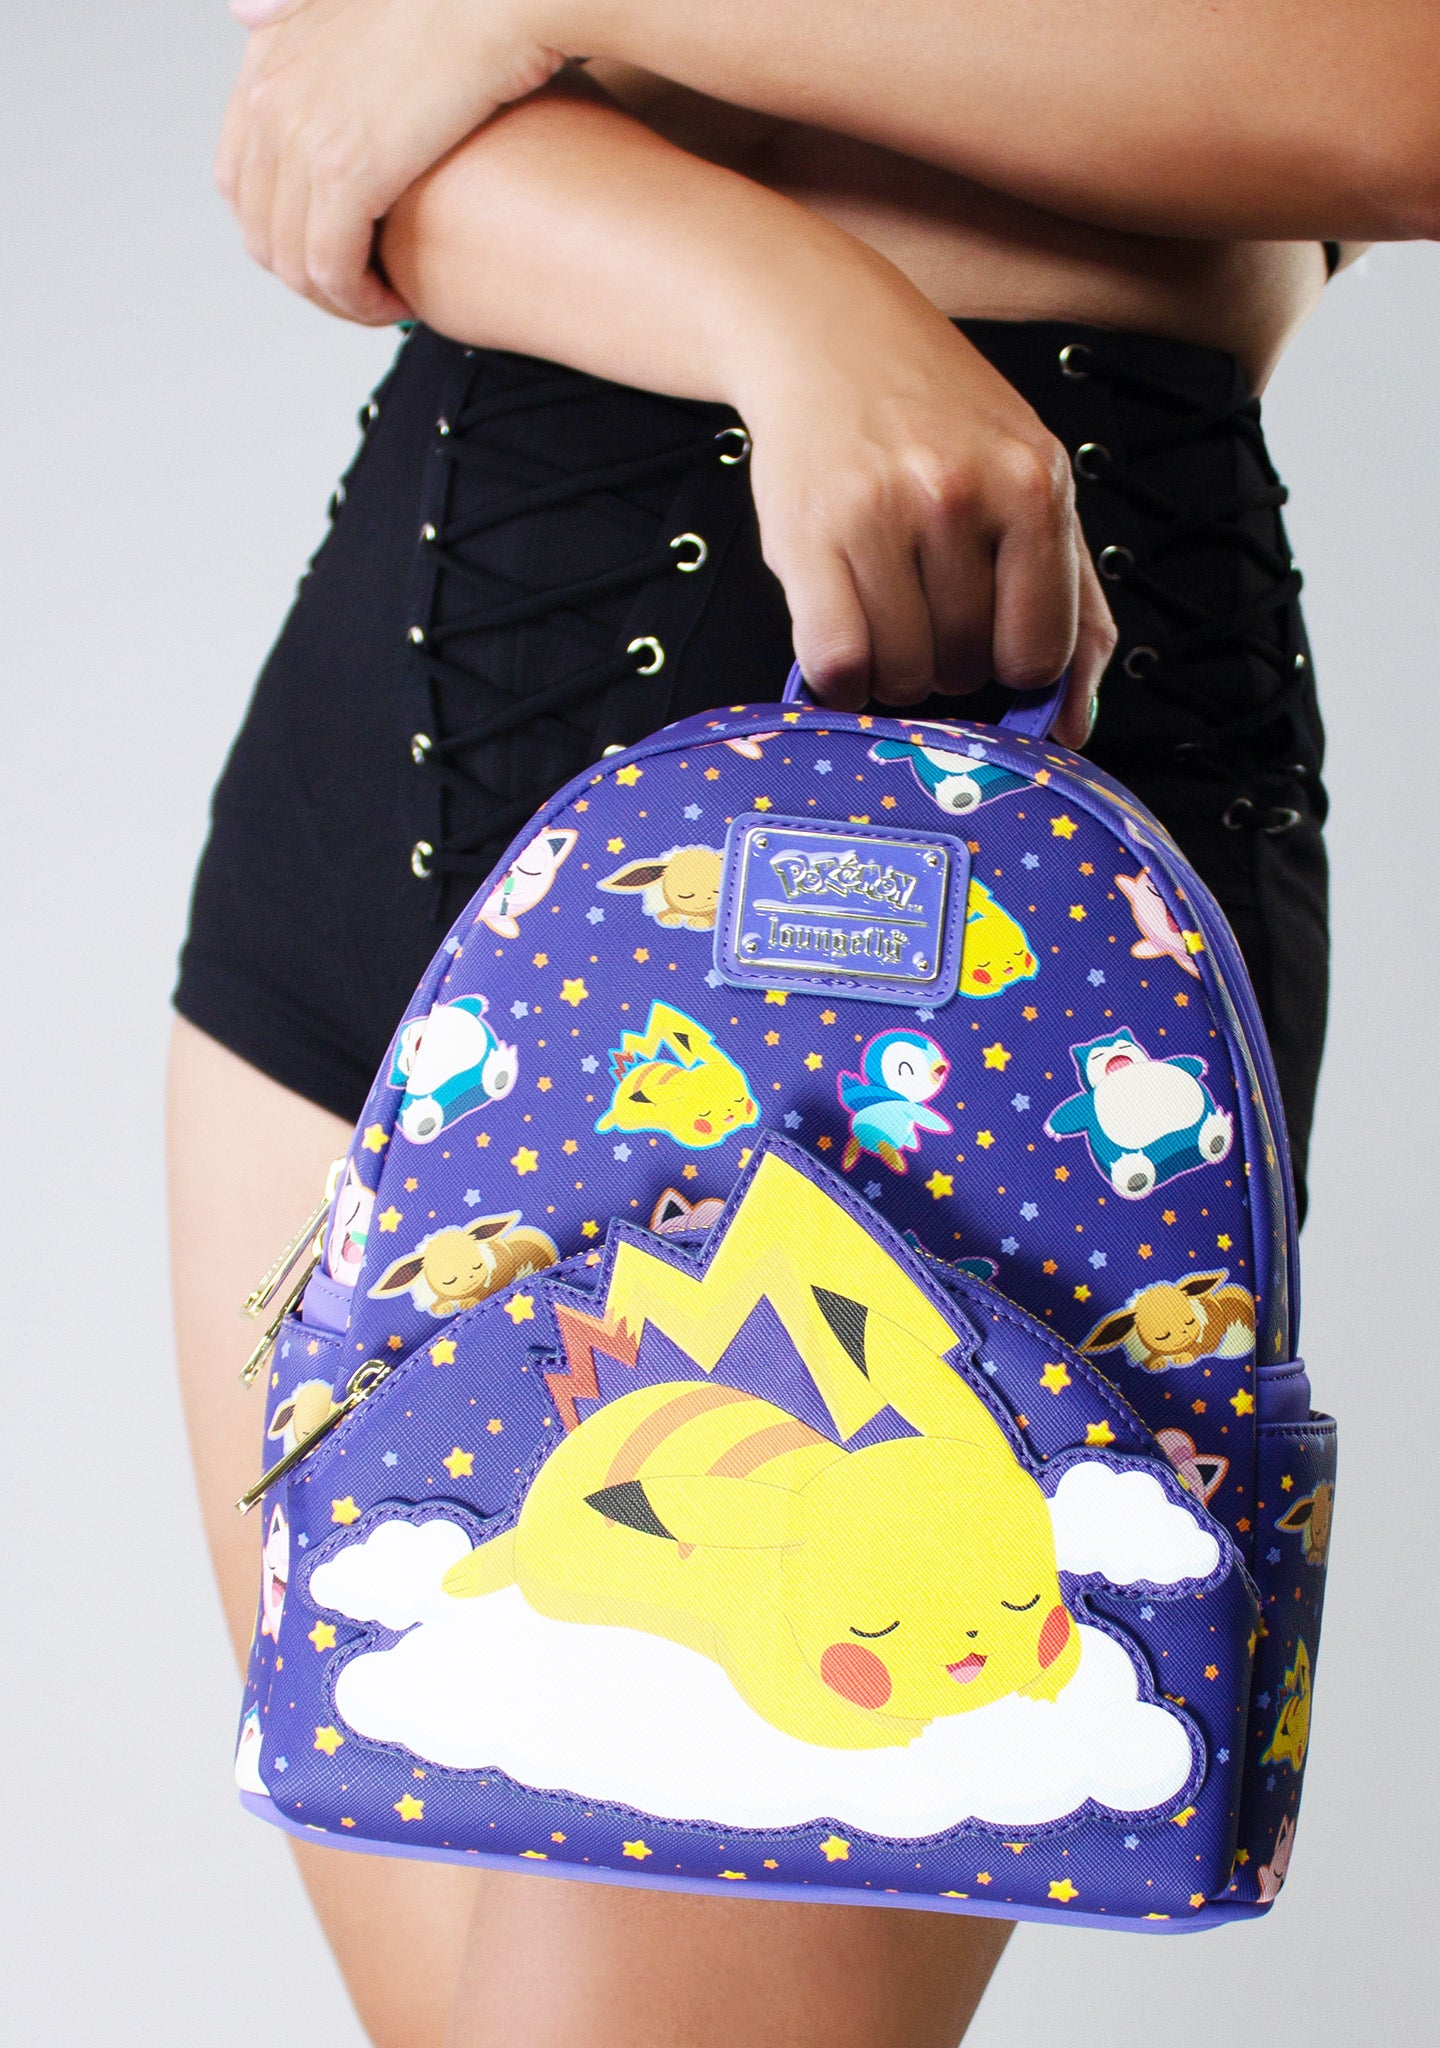 Loungefly, Bags, Nwt Loungefly Pokemon Pikachu And Friends Mini Backpack  And Plush 8